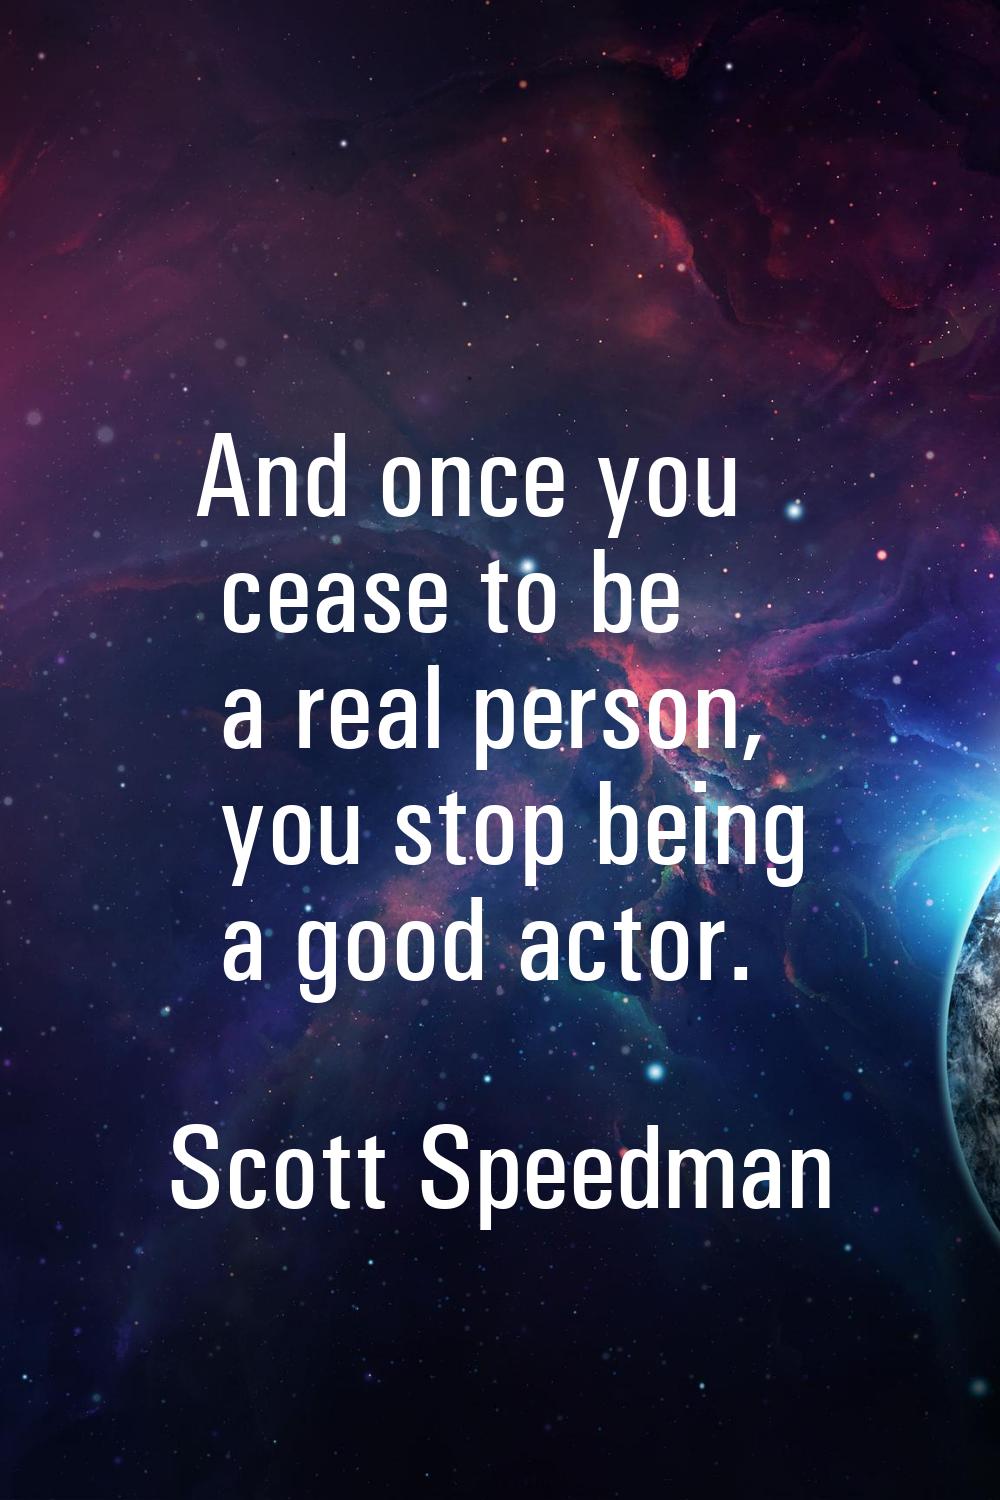 And once you cease to be a real person, you stop being a good actor.